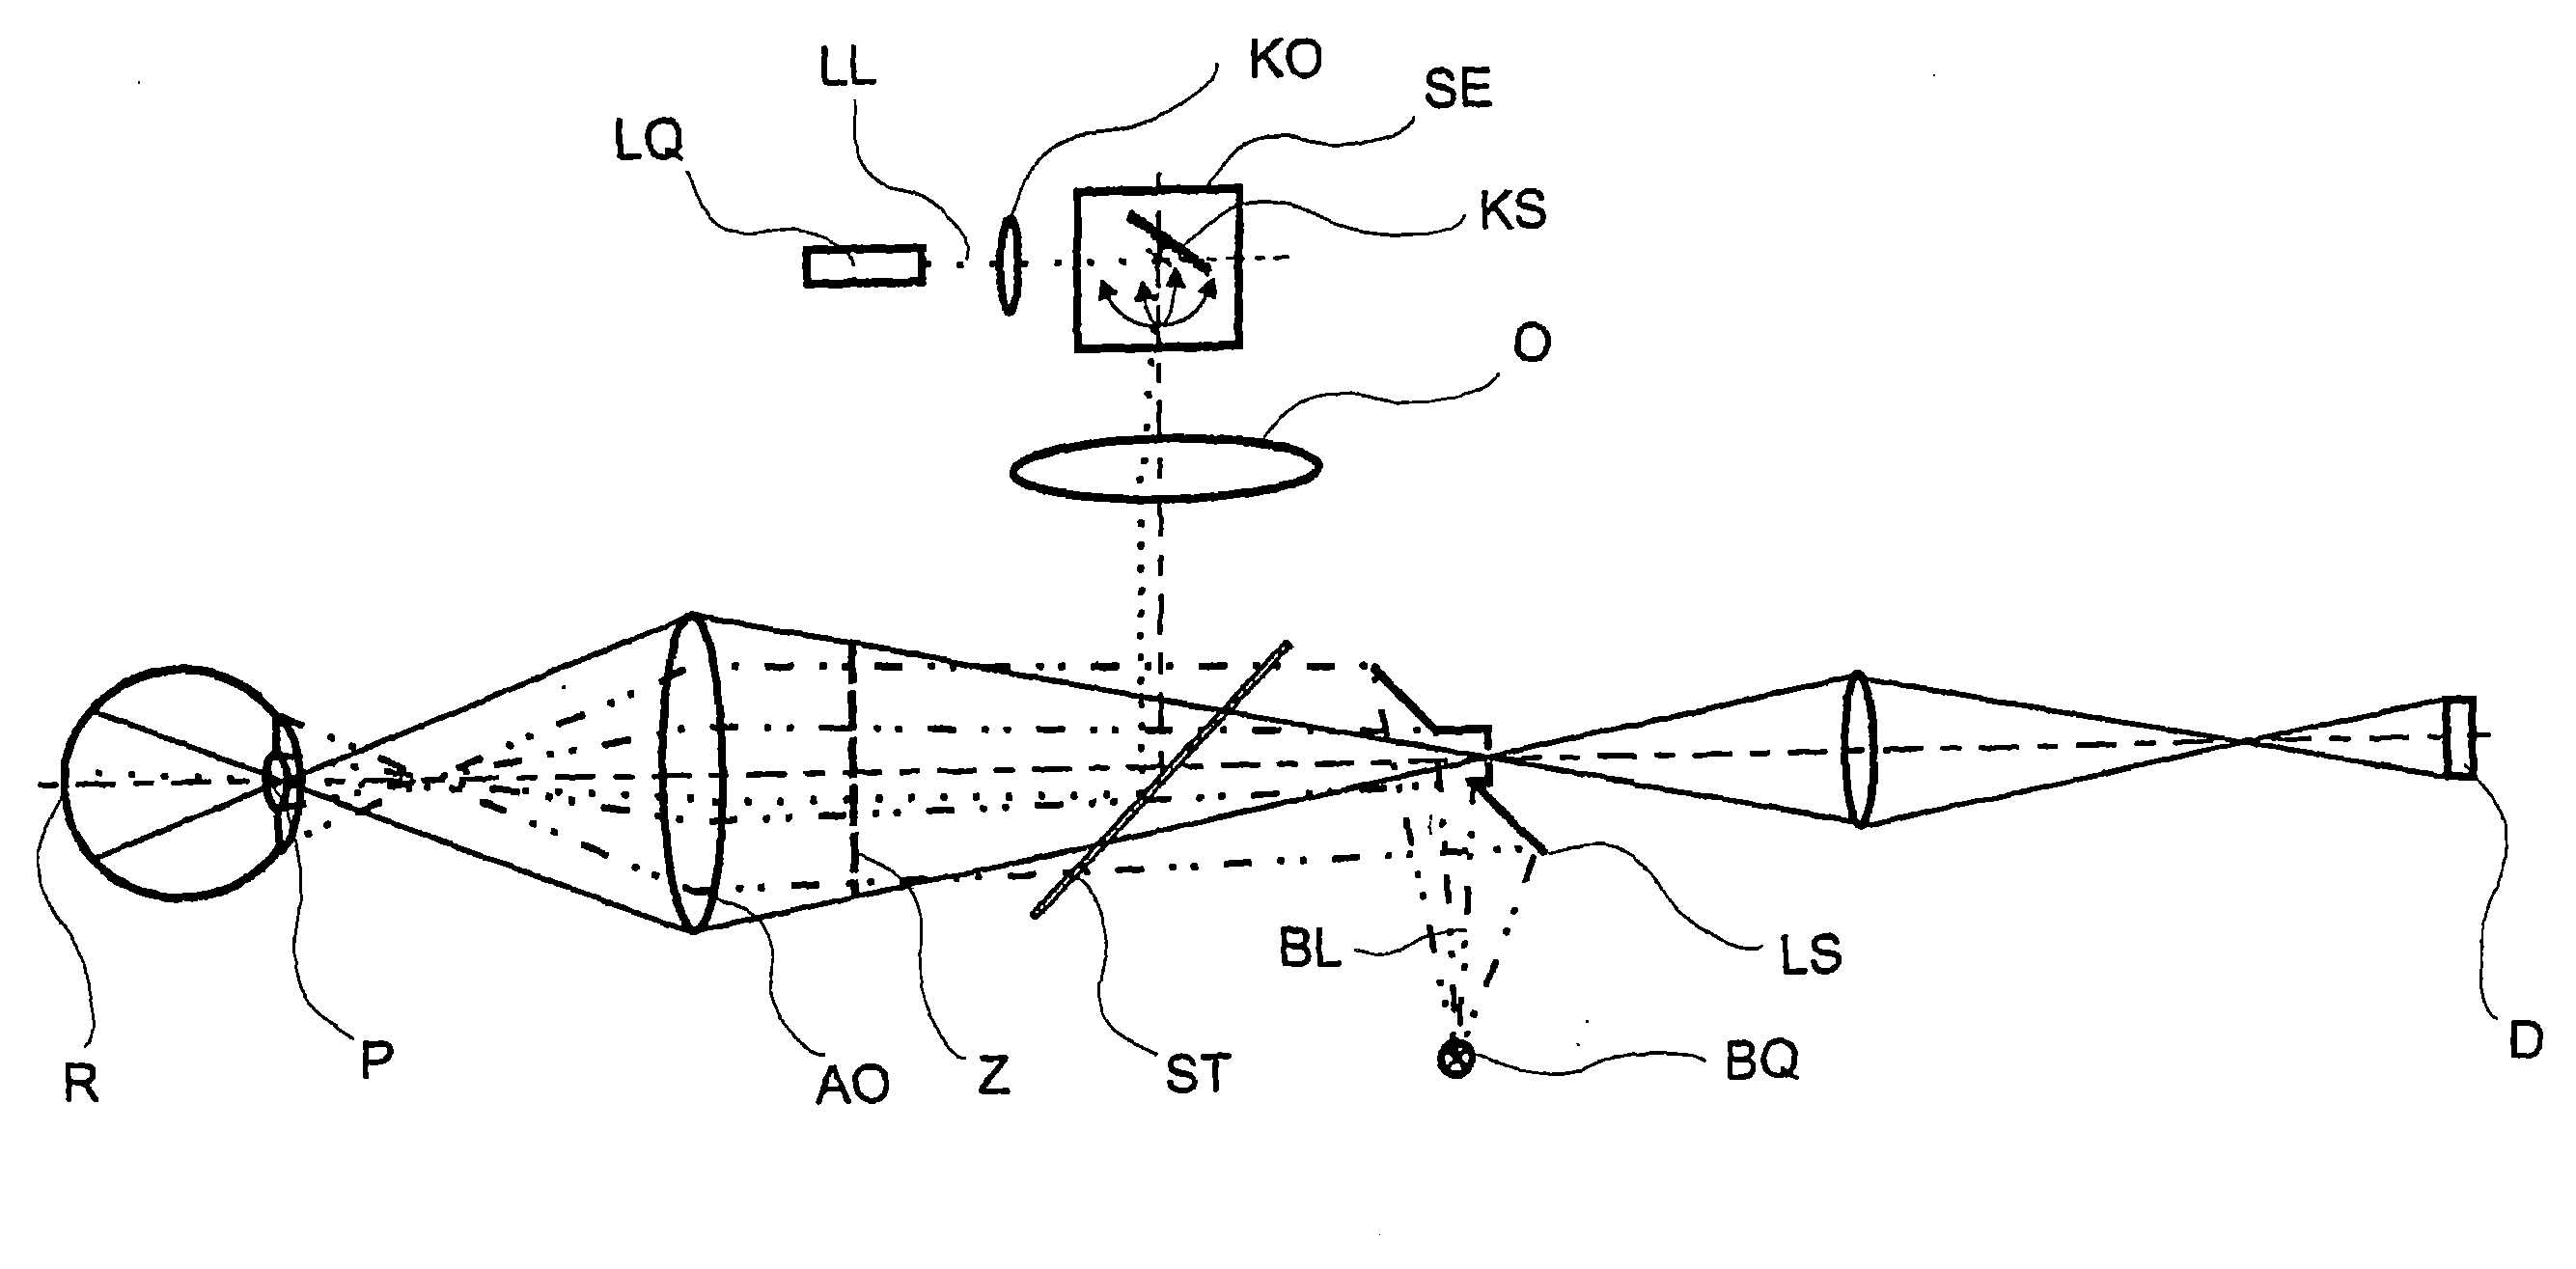 Ophthalmologic apparatus and method for the observation, examination, diagnosis, and/or treatment of an eye